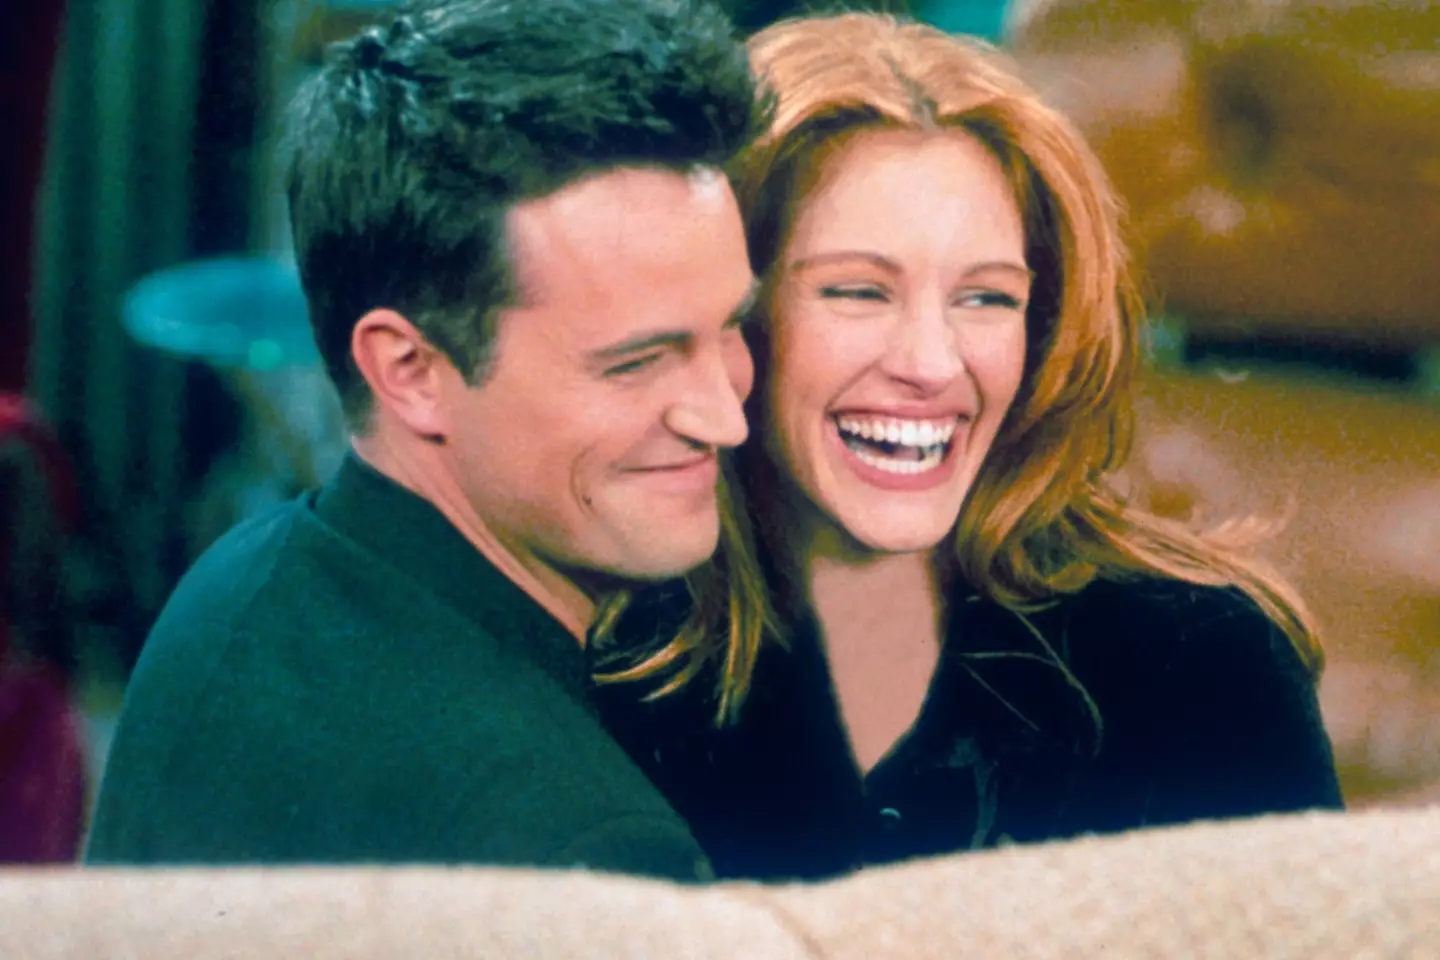 Matthew Perry hit it off with Julia Roberts when she appeared in a cameo alongside his character on Friends.